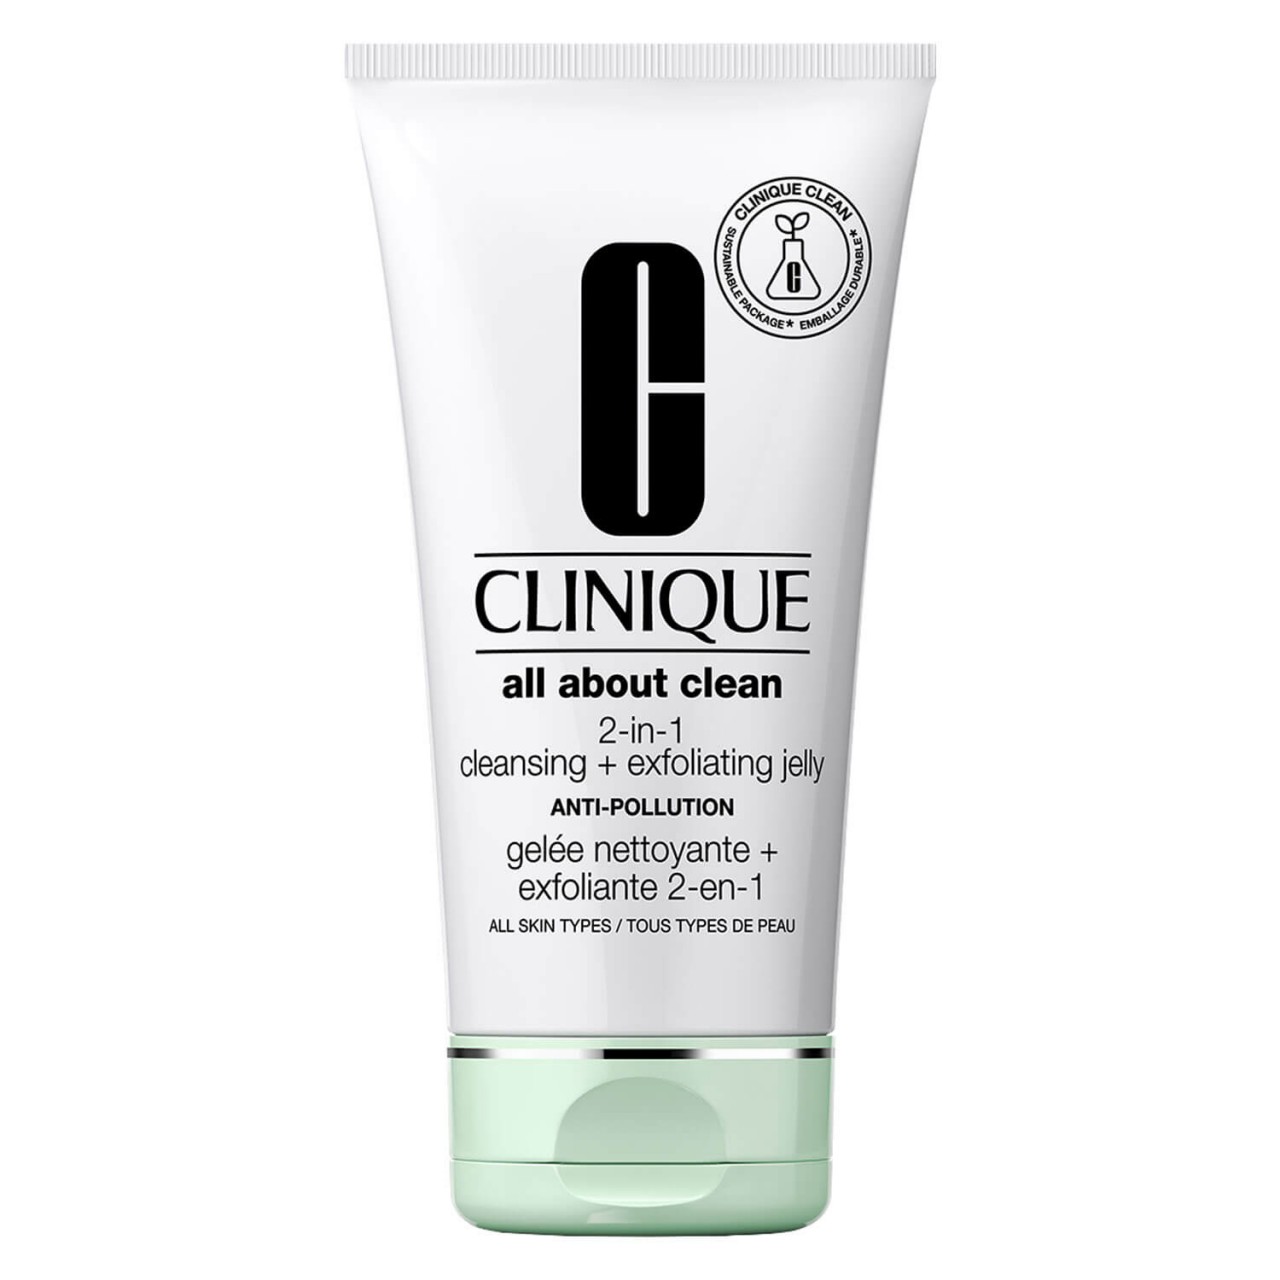 All About Clean - 2-In-1 Cleansing + Exfoliating Jelly Anti-Pollution von Clinique